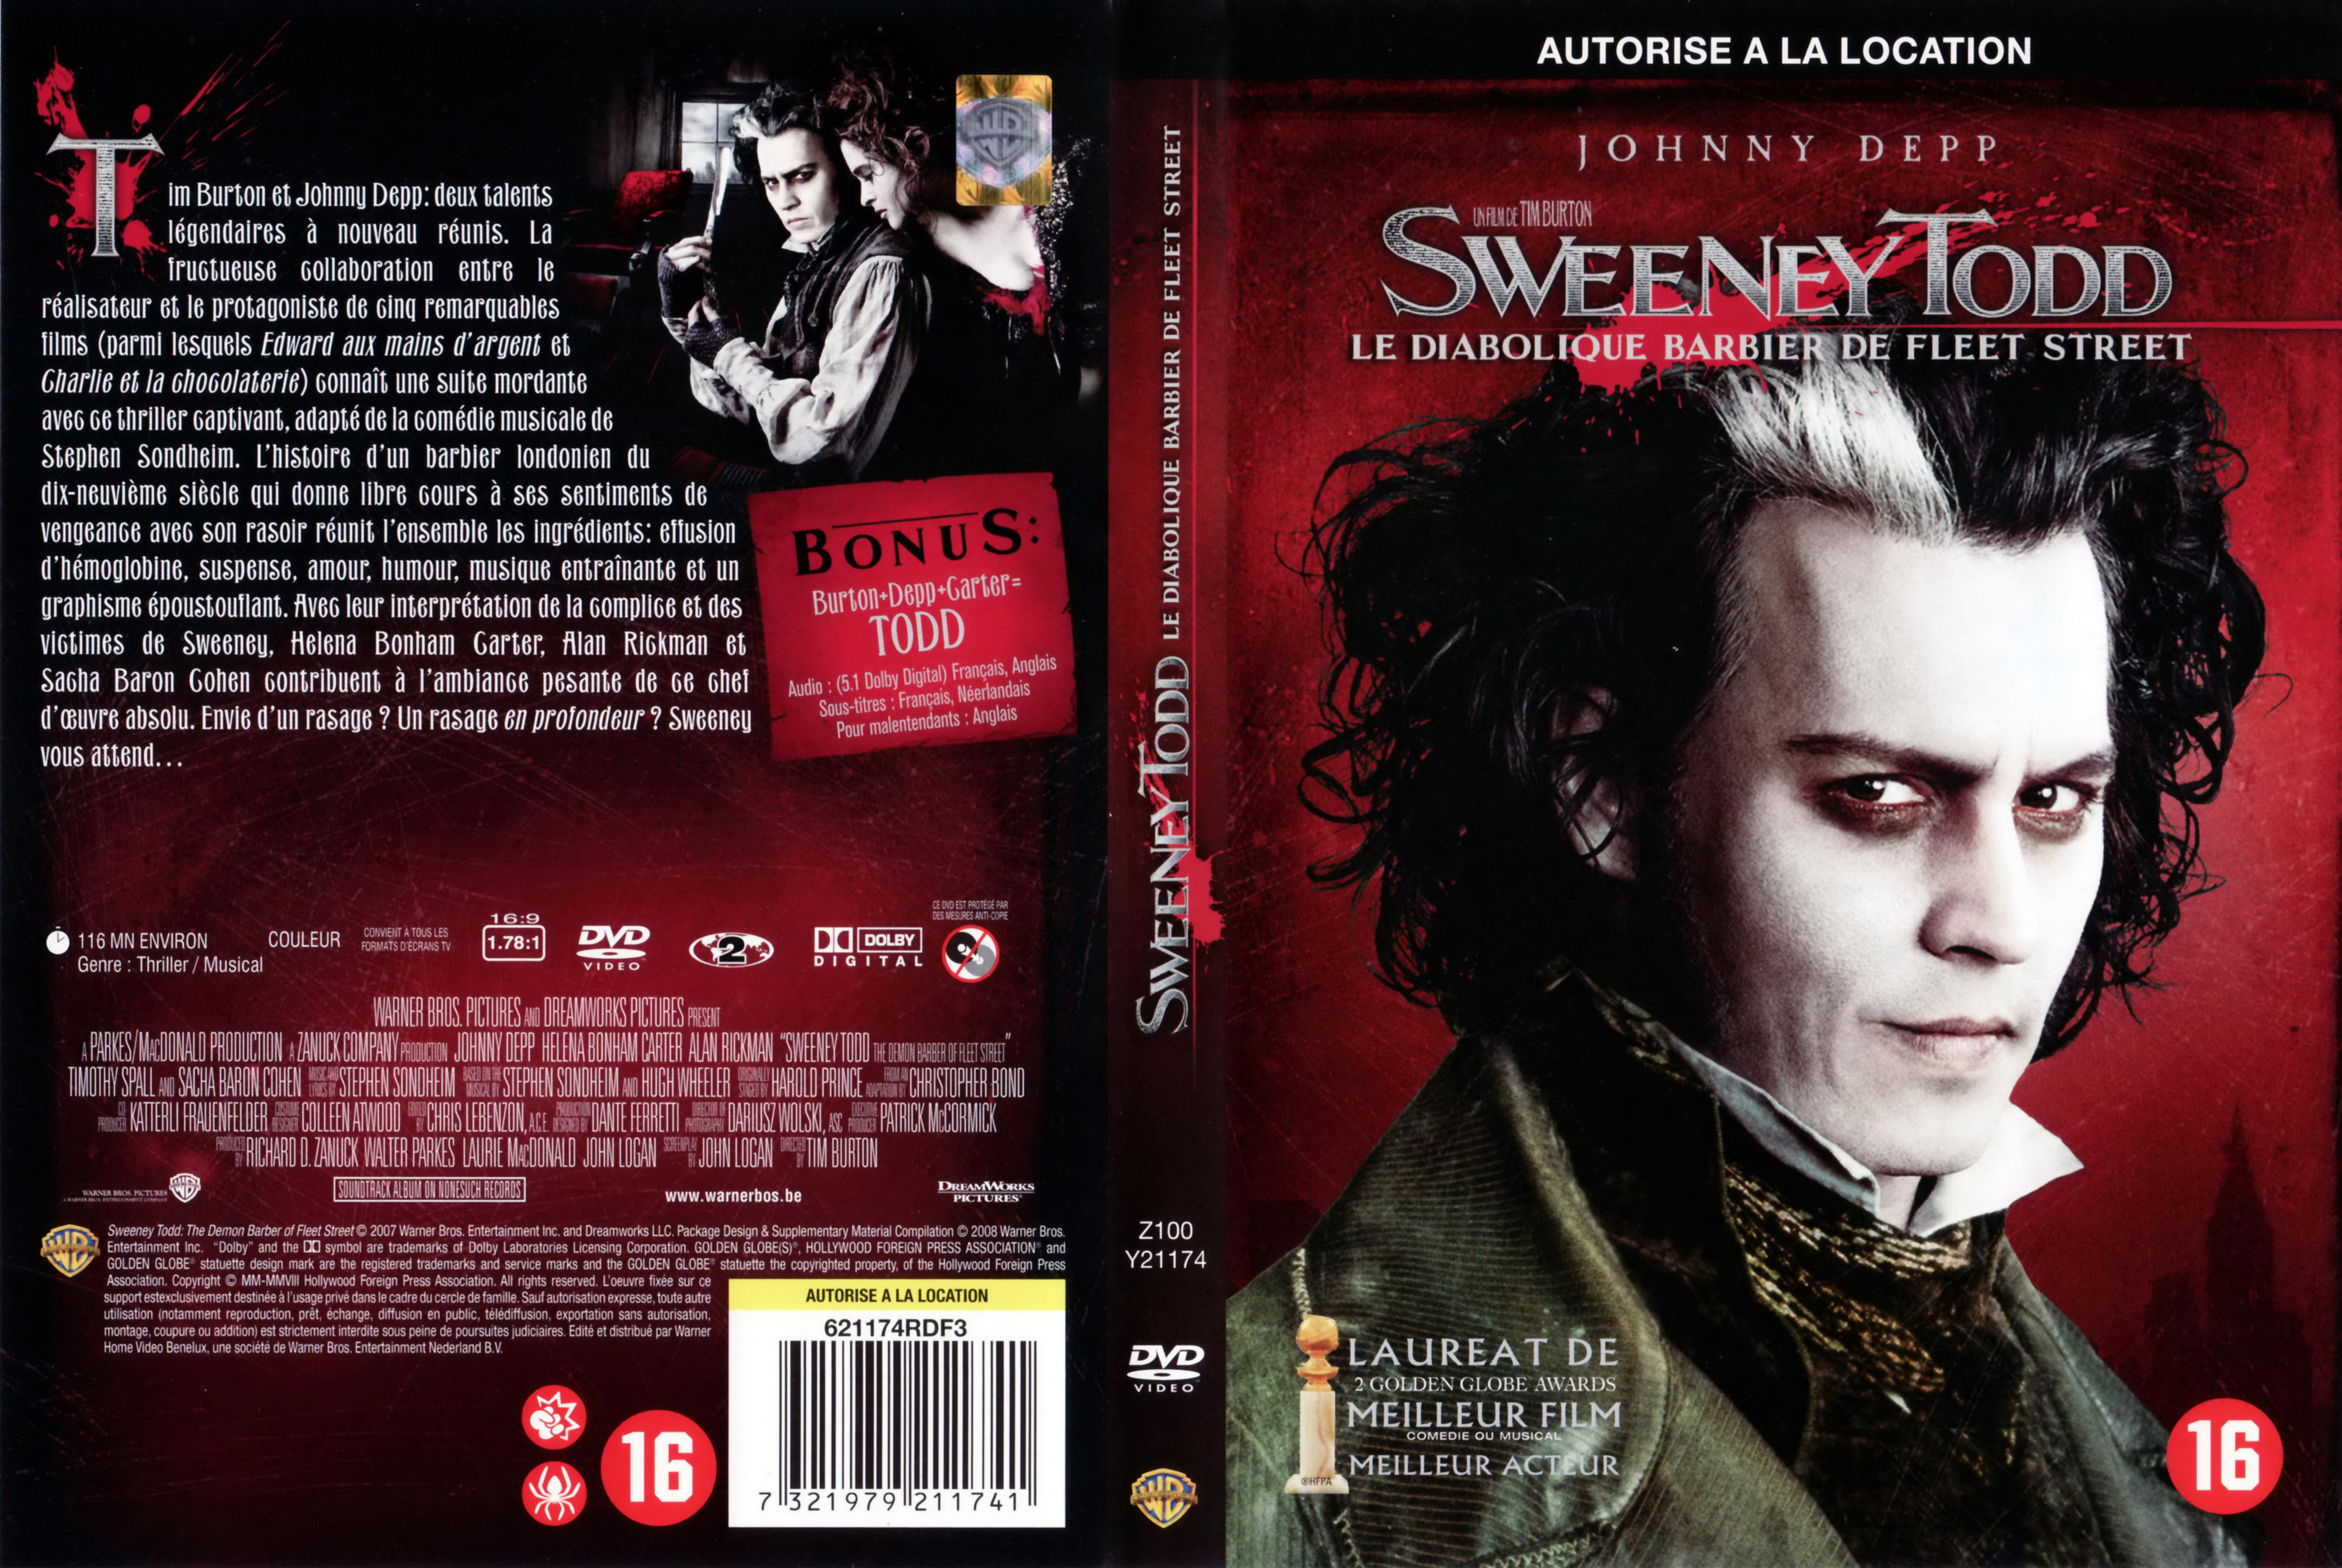 Jaquette DVD Sweeney Todd v3